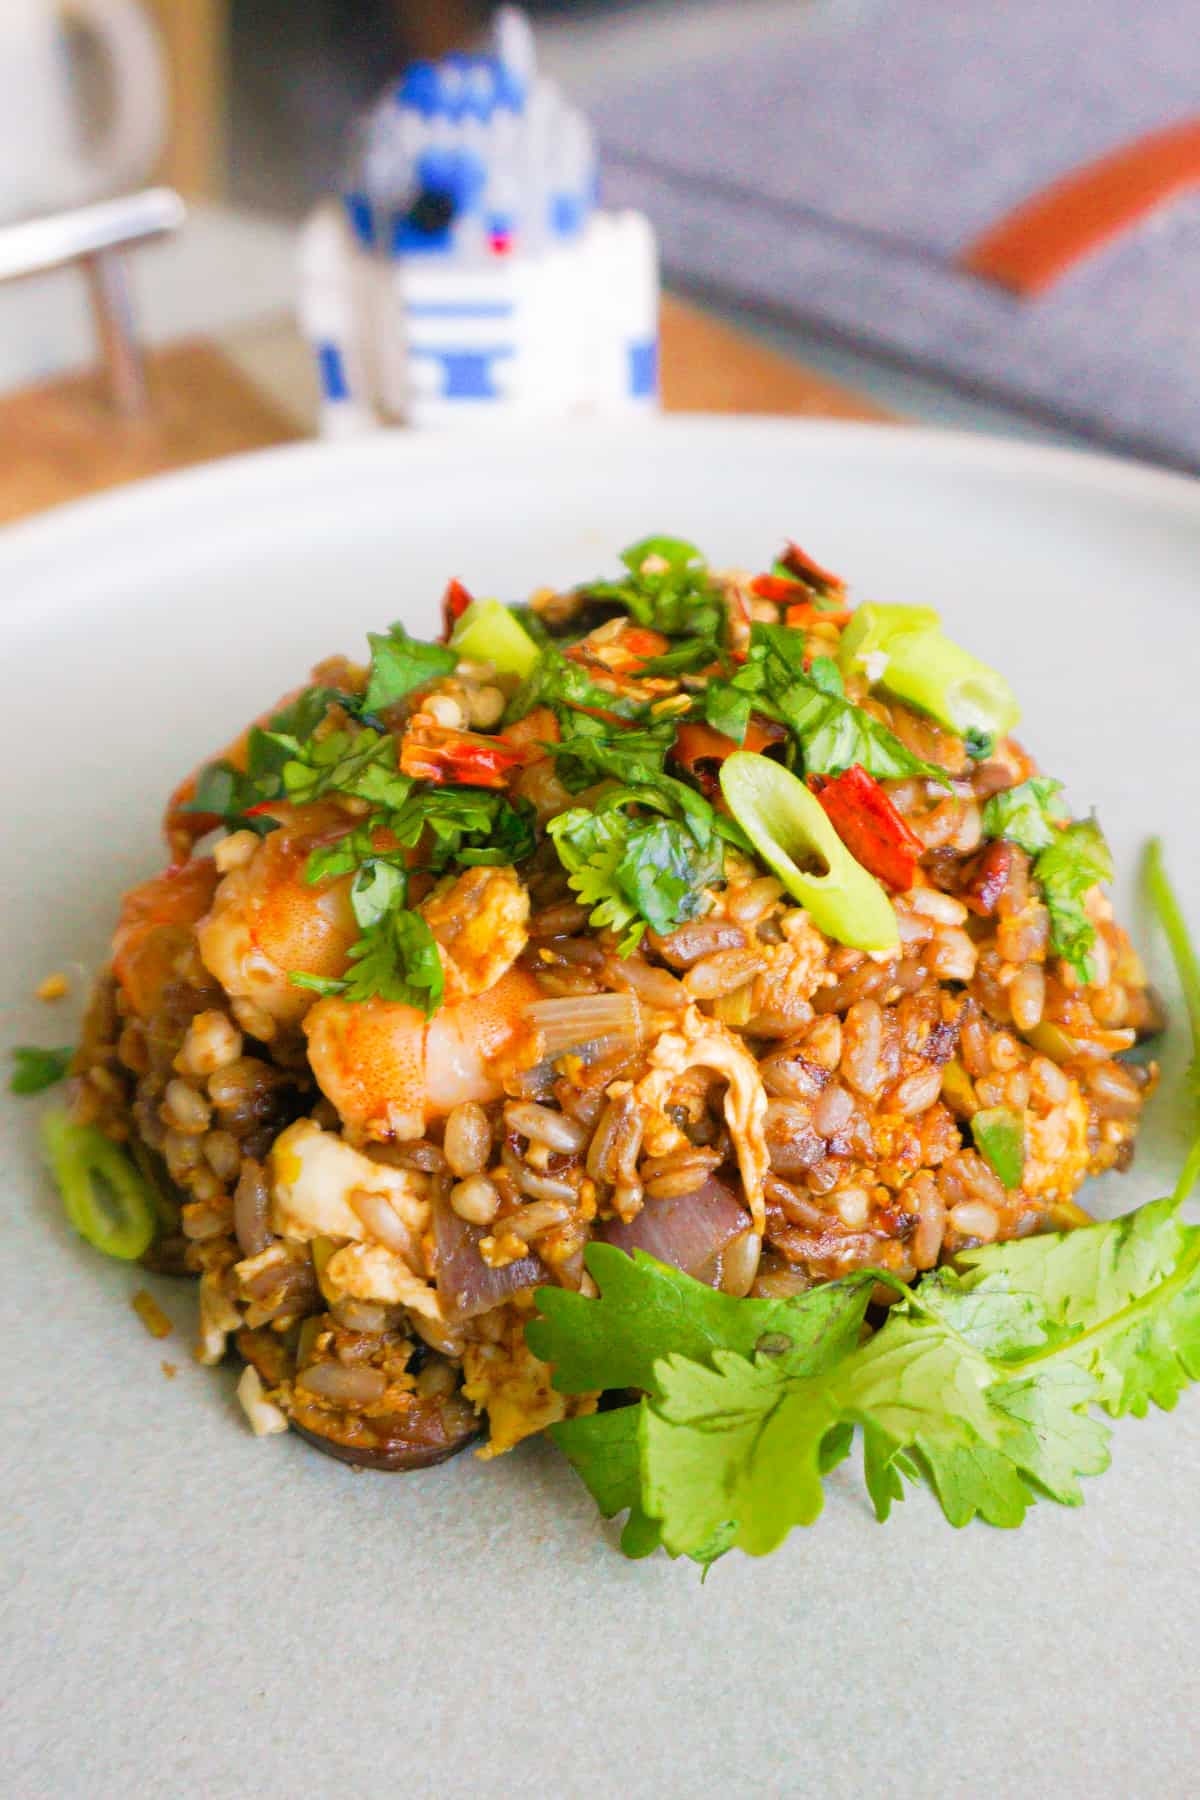 A mound of lemongrass fried rice garnished with scallions and cilantro.